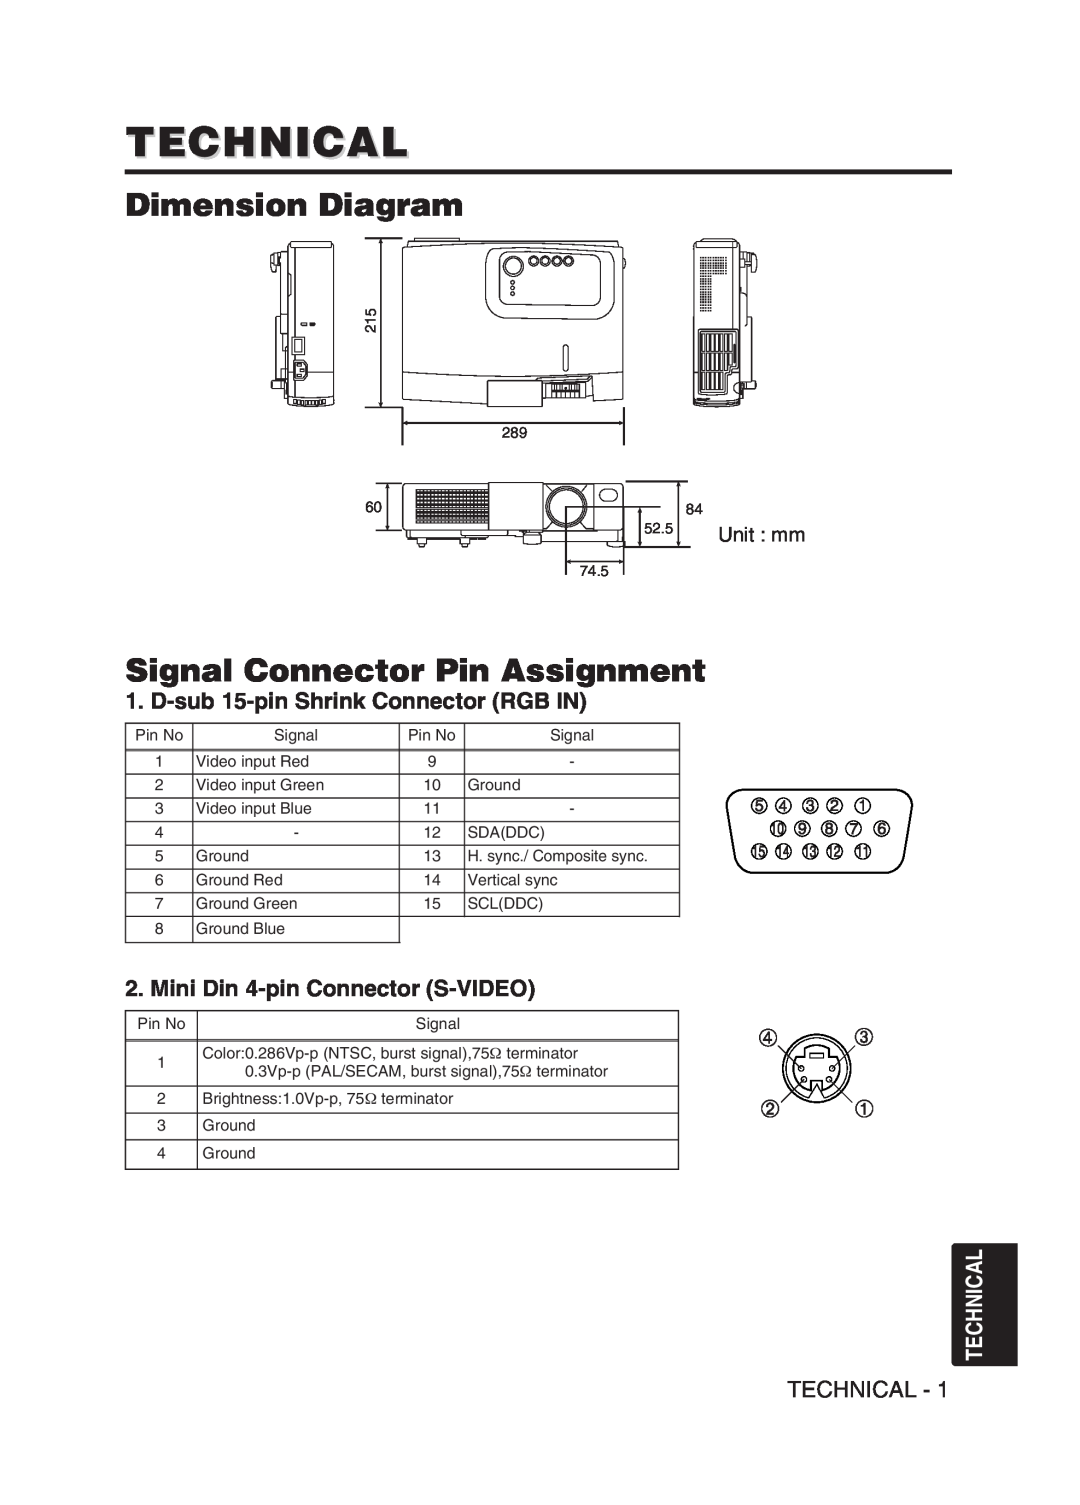 Hitachi CPS225W Technical, Dimension Diagram, Signal Connector Pin Assignment, D-sub 15-pin Shrink Connector RGB IN 